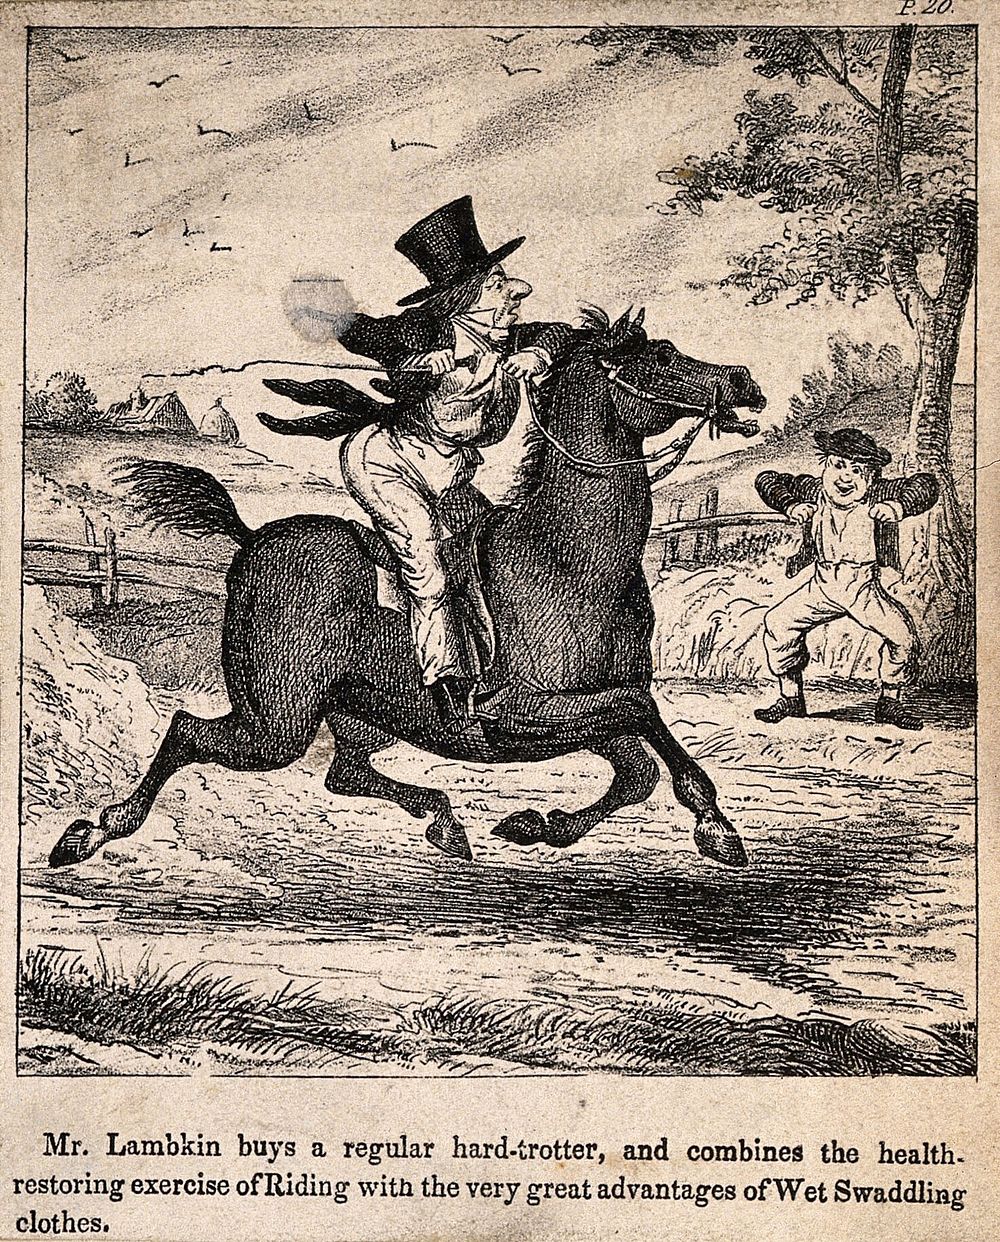 Mr. Lambkin trying to find a new cure for his illness; riding a horse in wet clothes. Lithograph by G. Cruikshank.